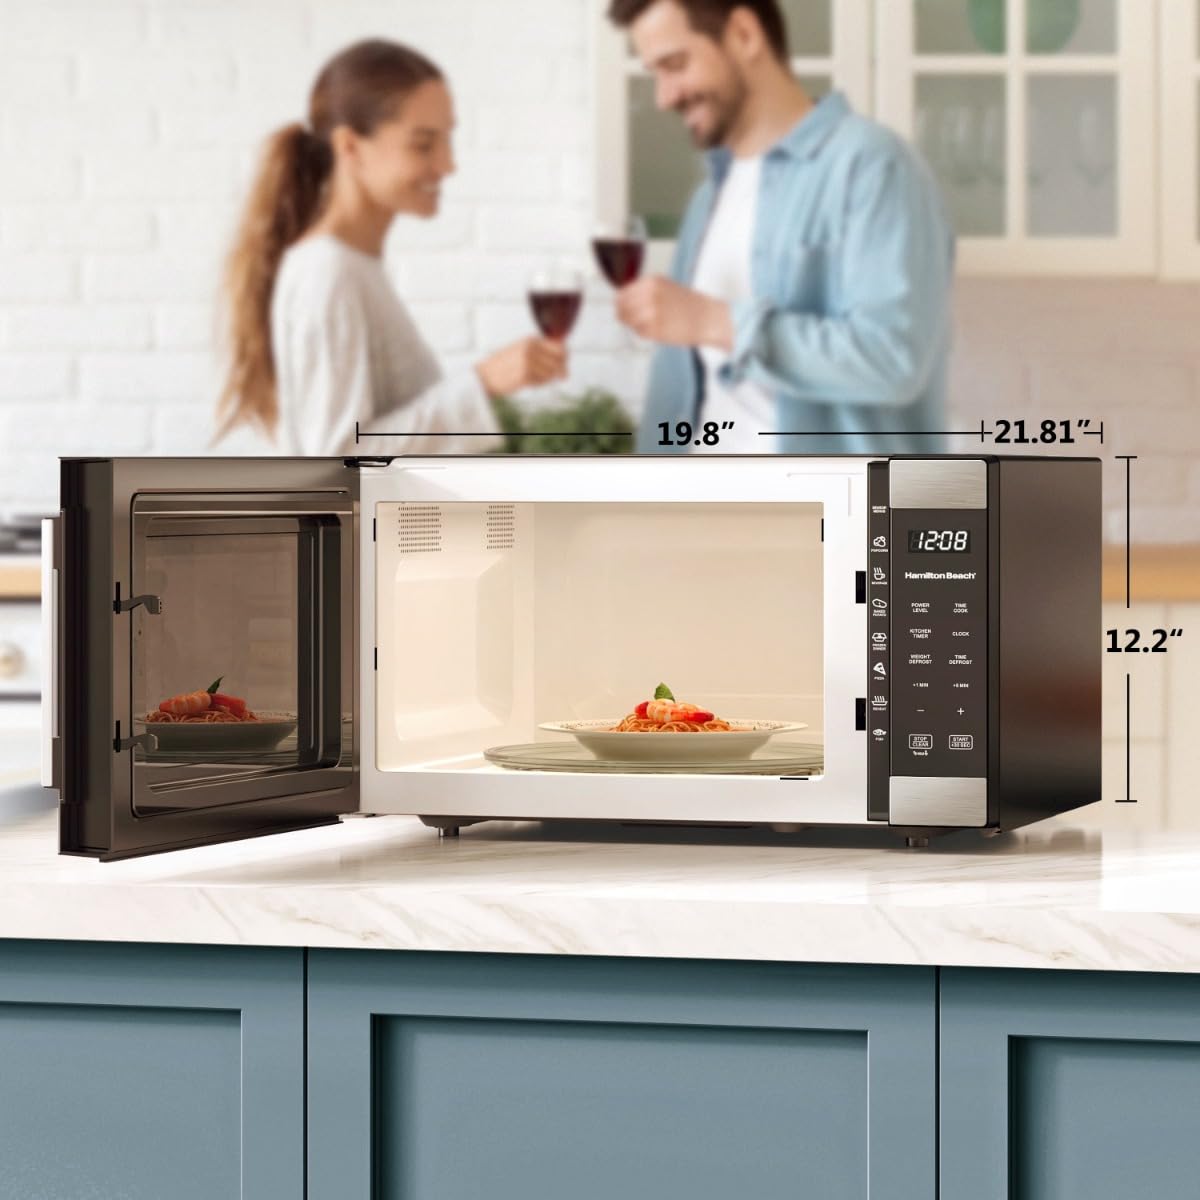 1.6 Cu ft Sensor Cook Countertop Microwave Oven in Stainless Steel, New